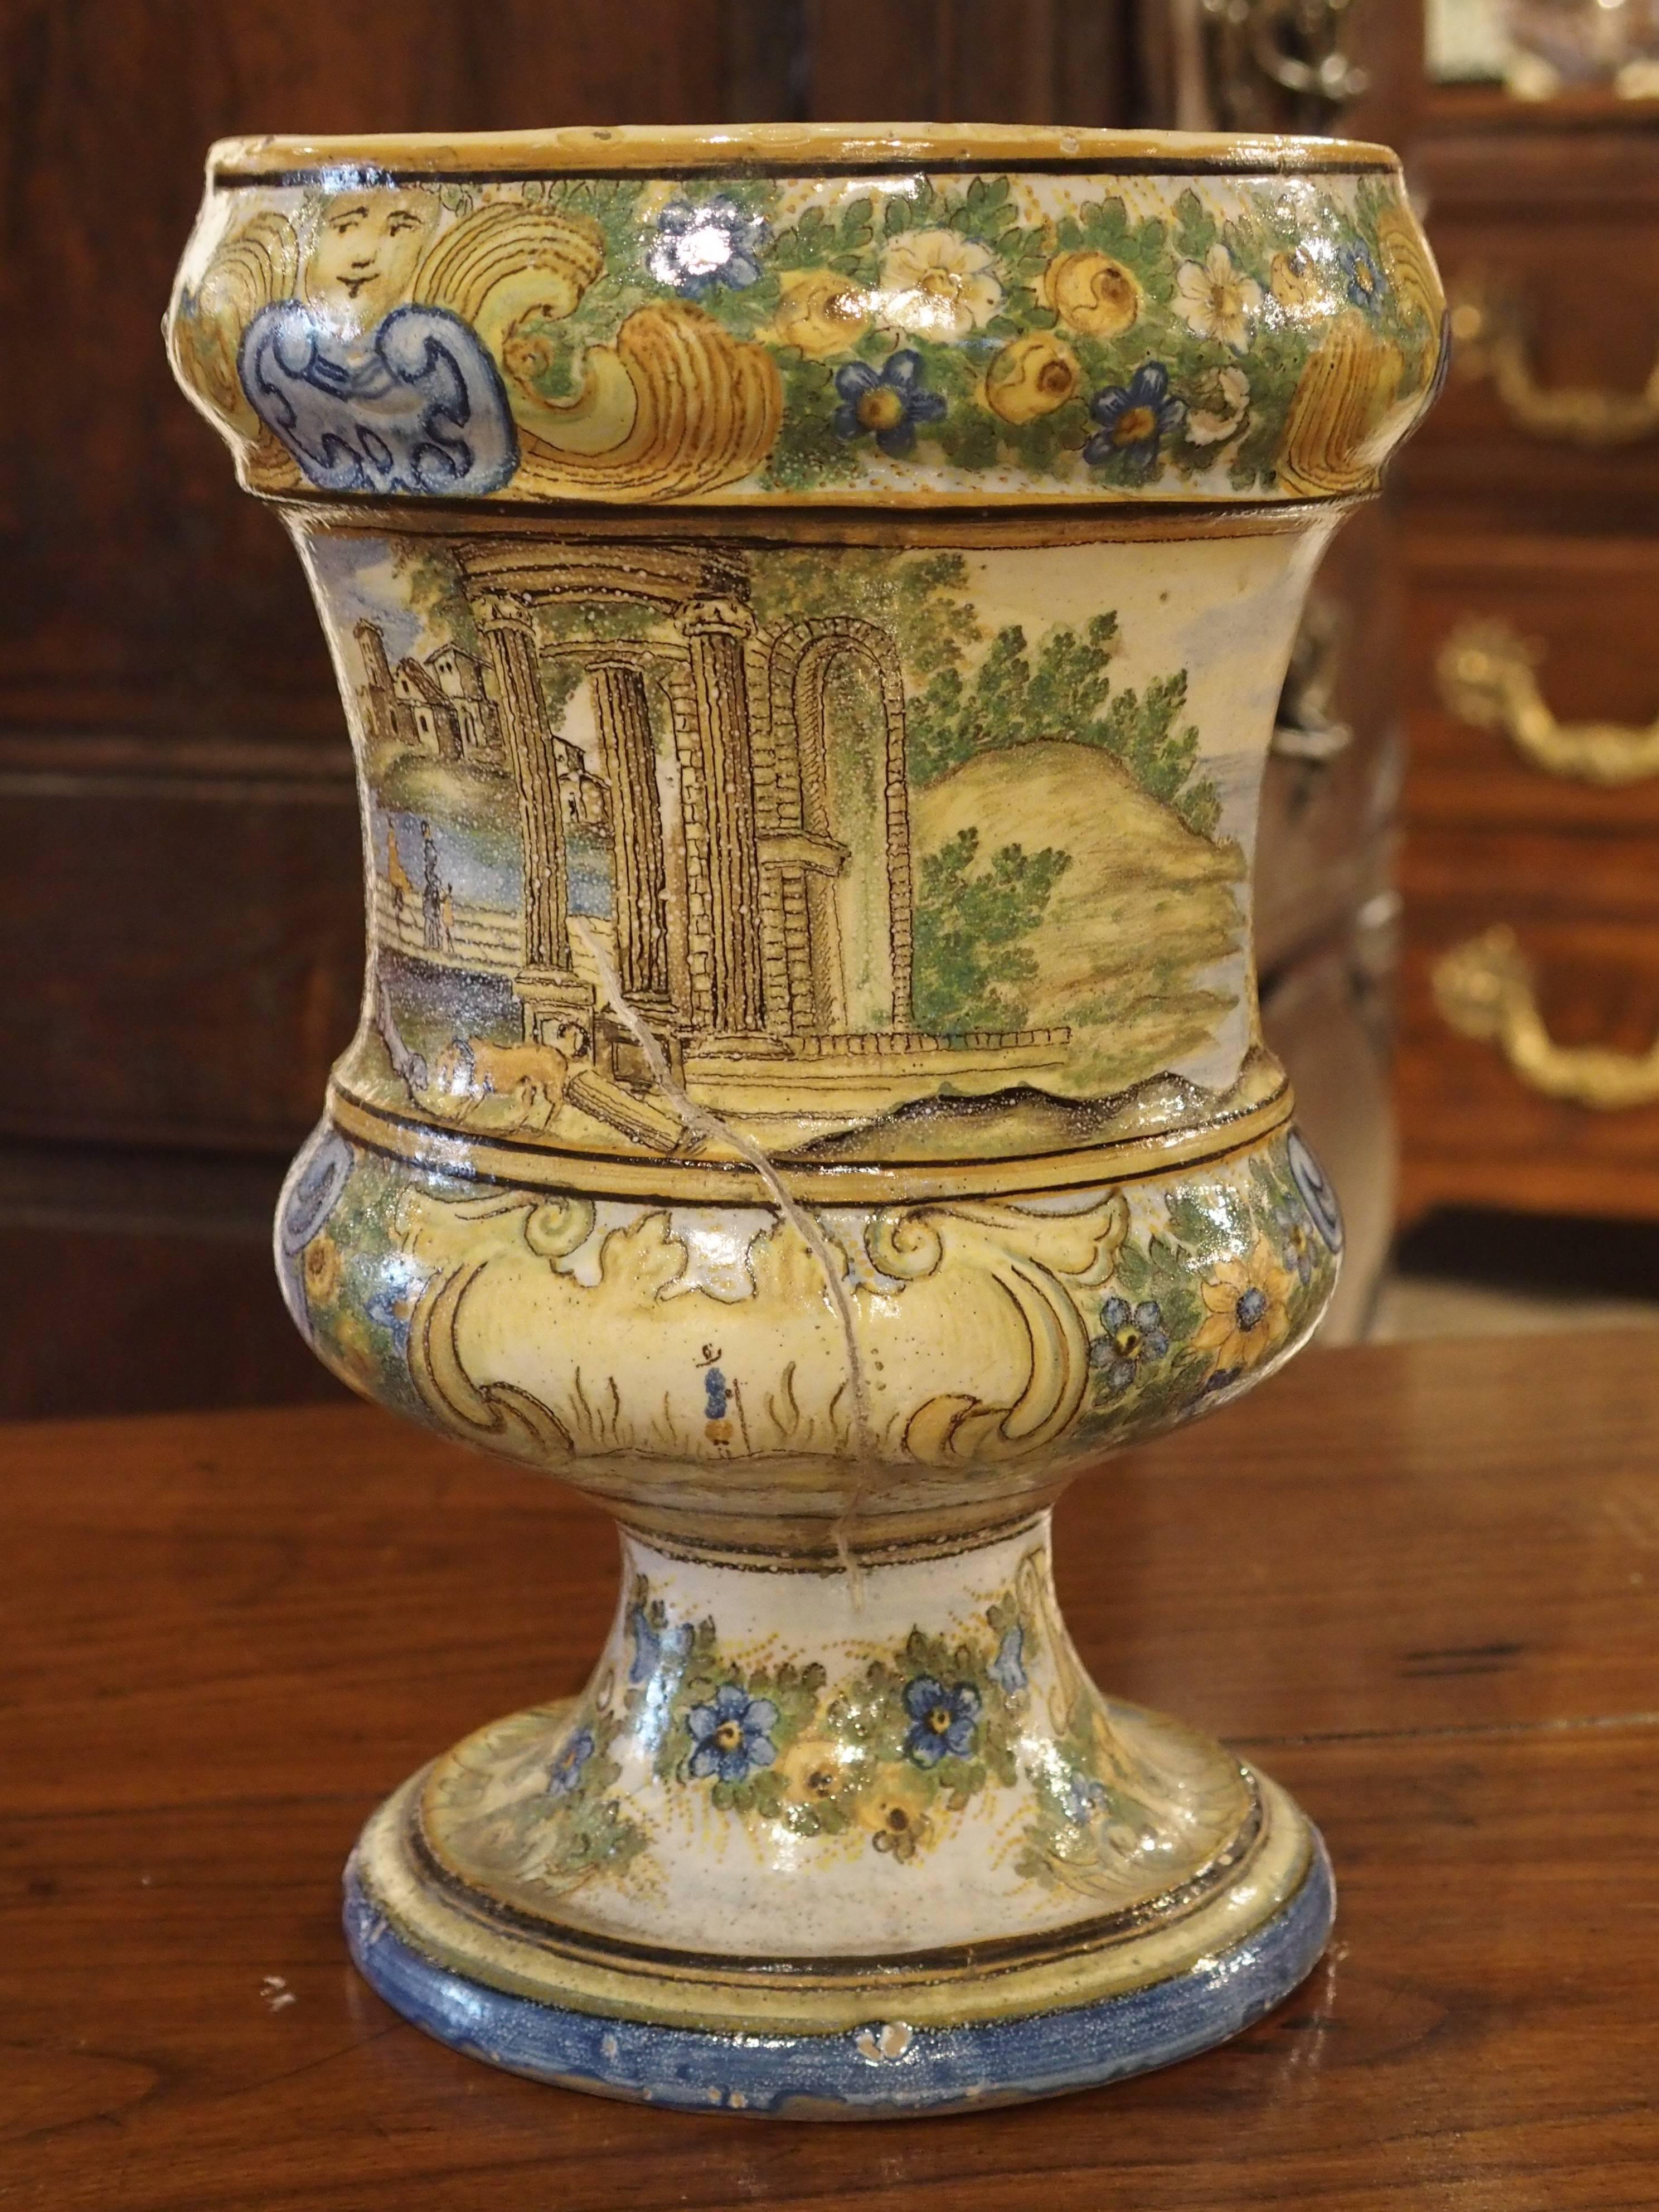 19th Century Small Antique Ceramic Urn from Italy, Early 1800s